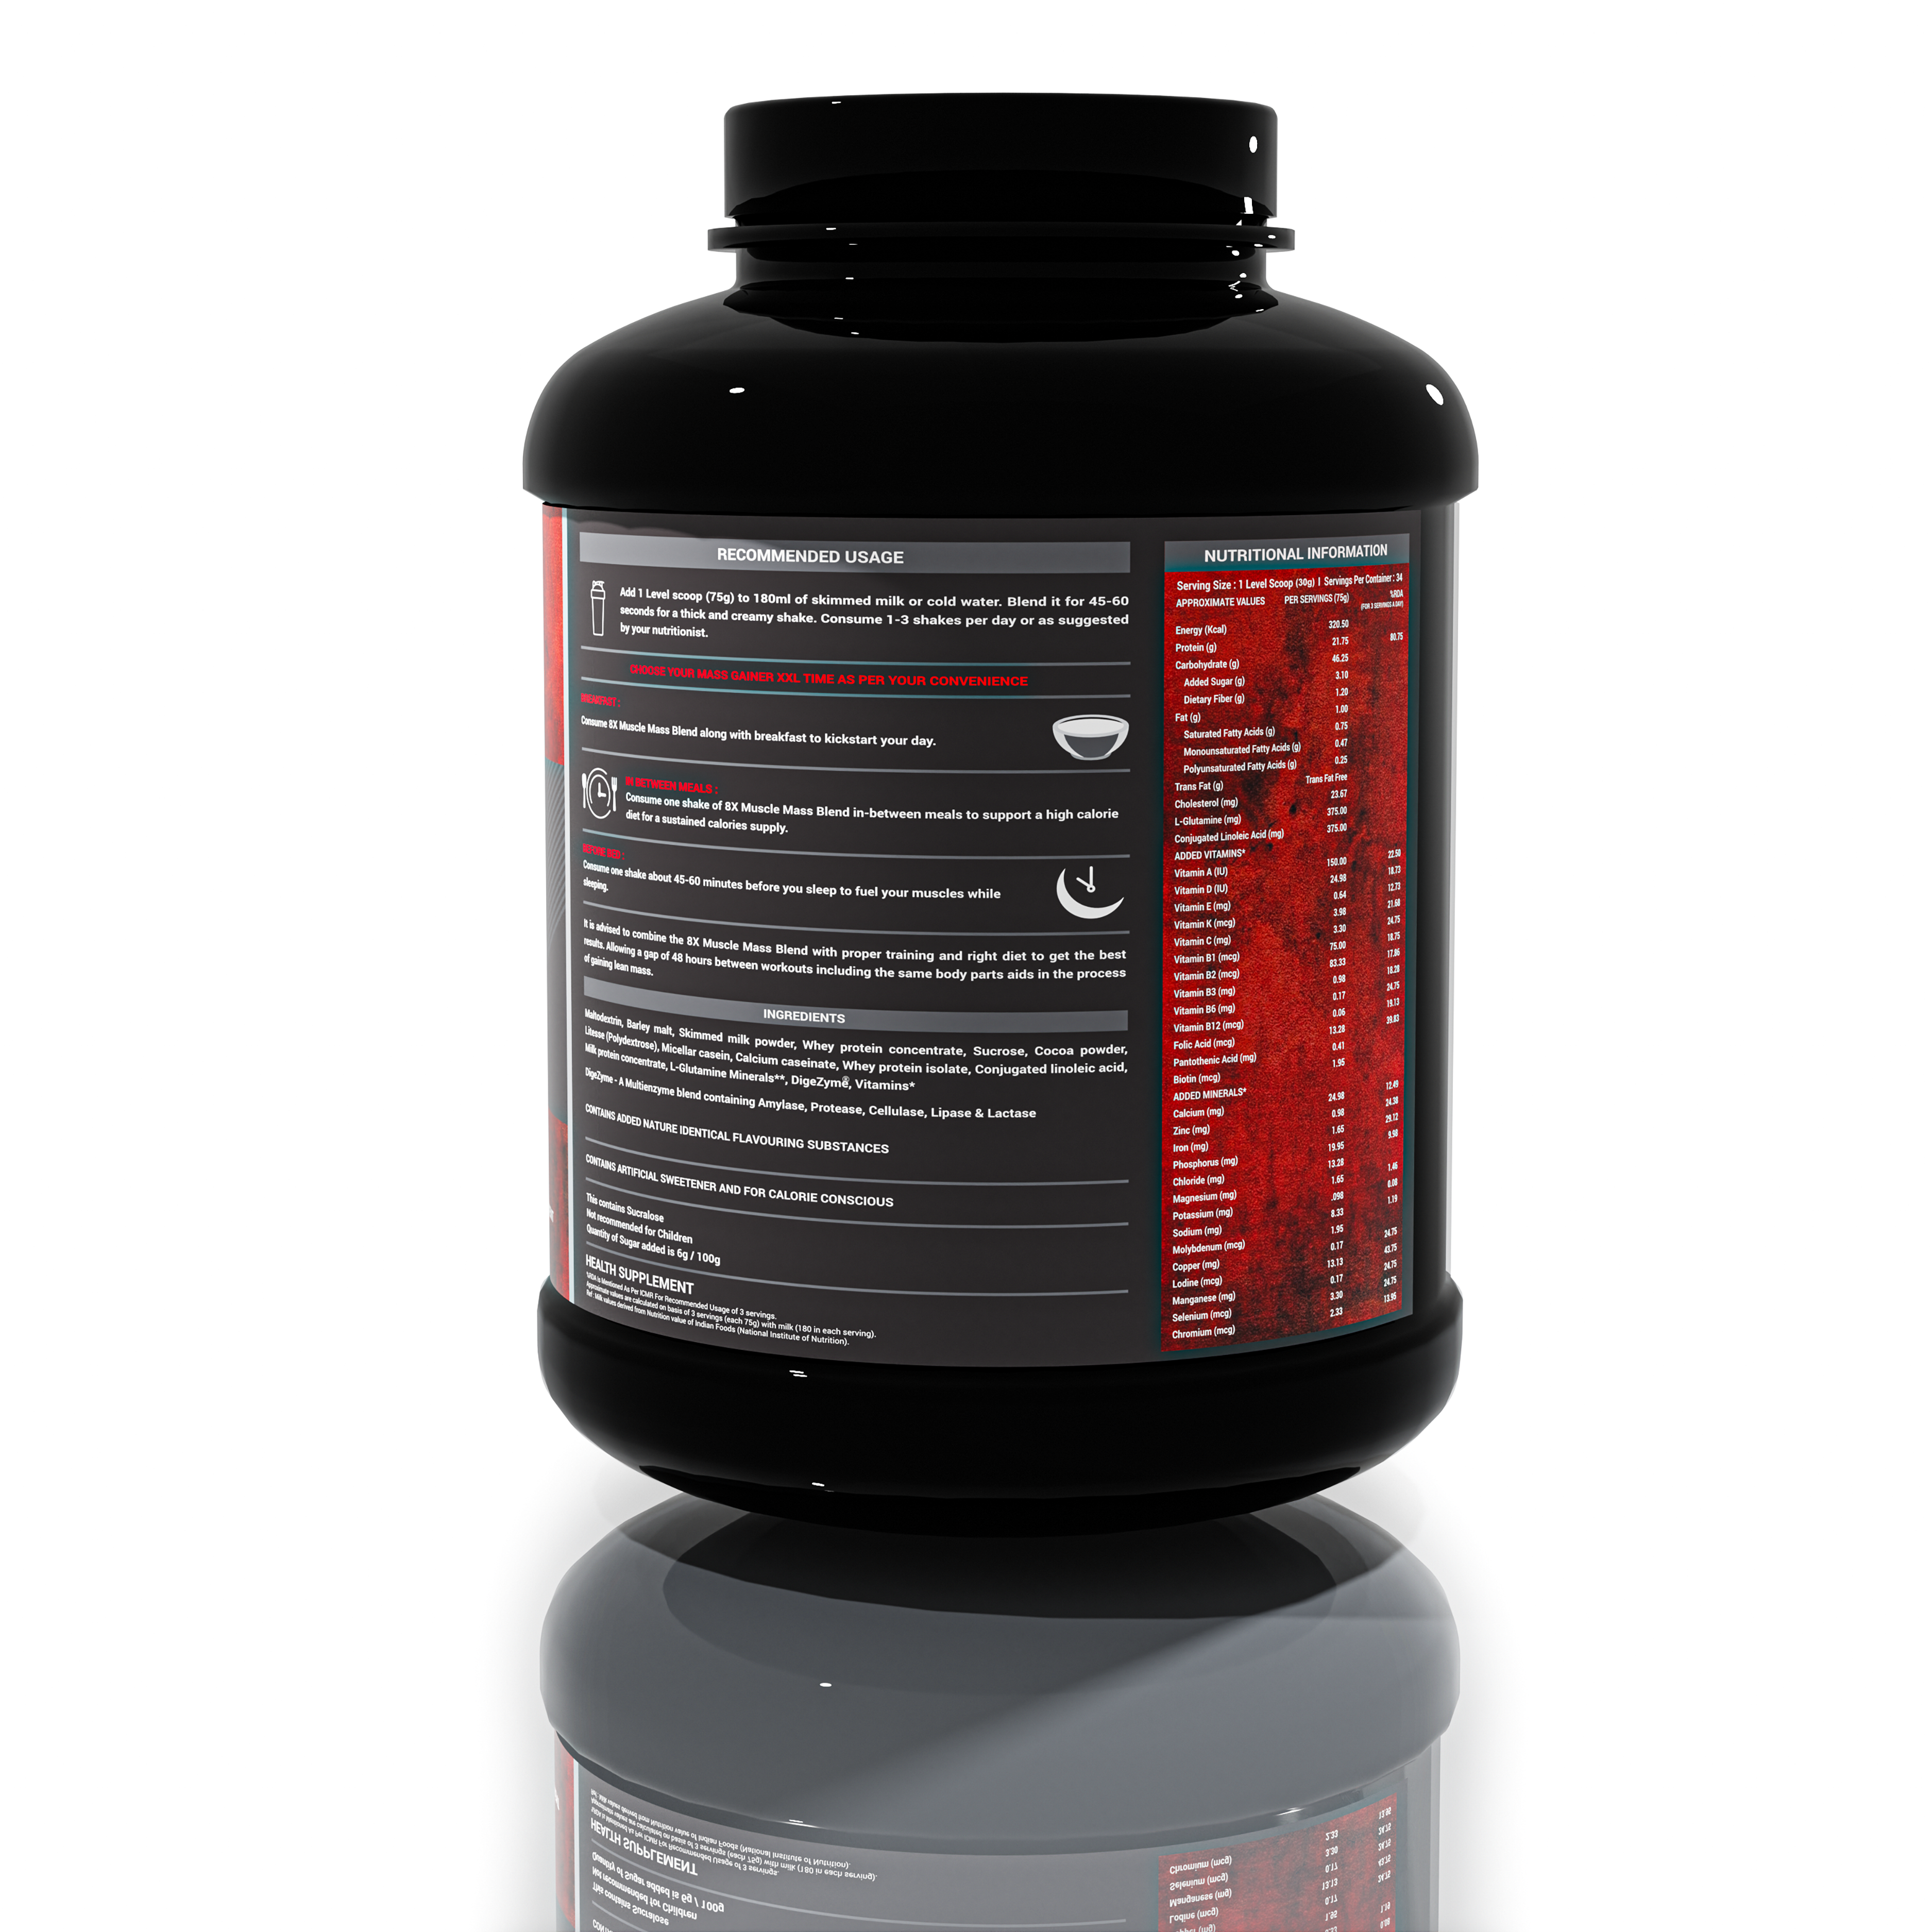 8X Nutrition Muscle Mass Blend with Complex Carbs and Proteins in 3:1 ratio (6.6 LBS) - BELGIUM CHOCOLATE MOUSSE